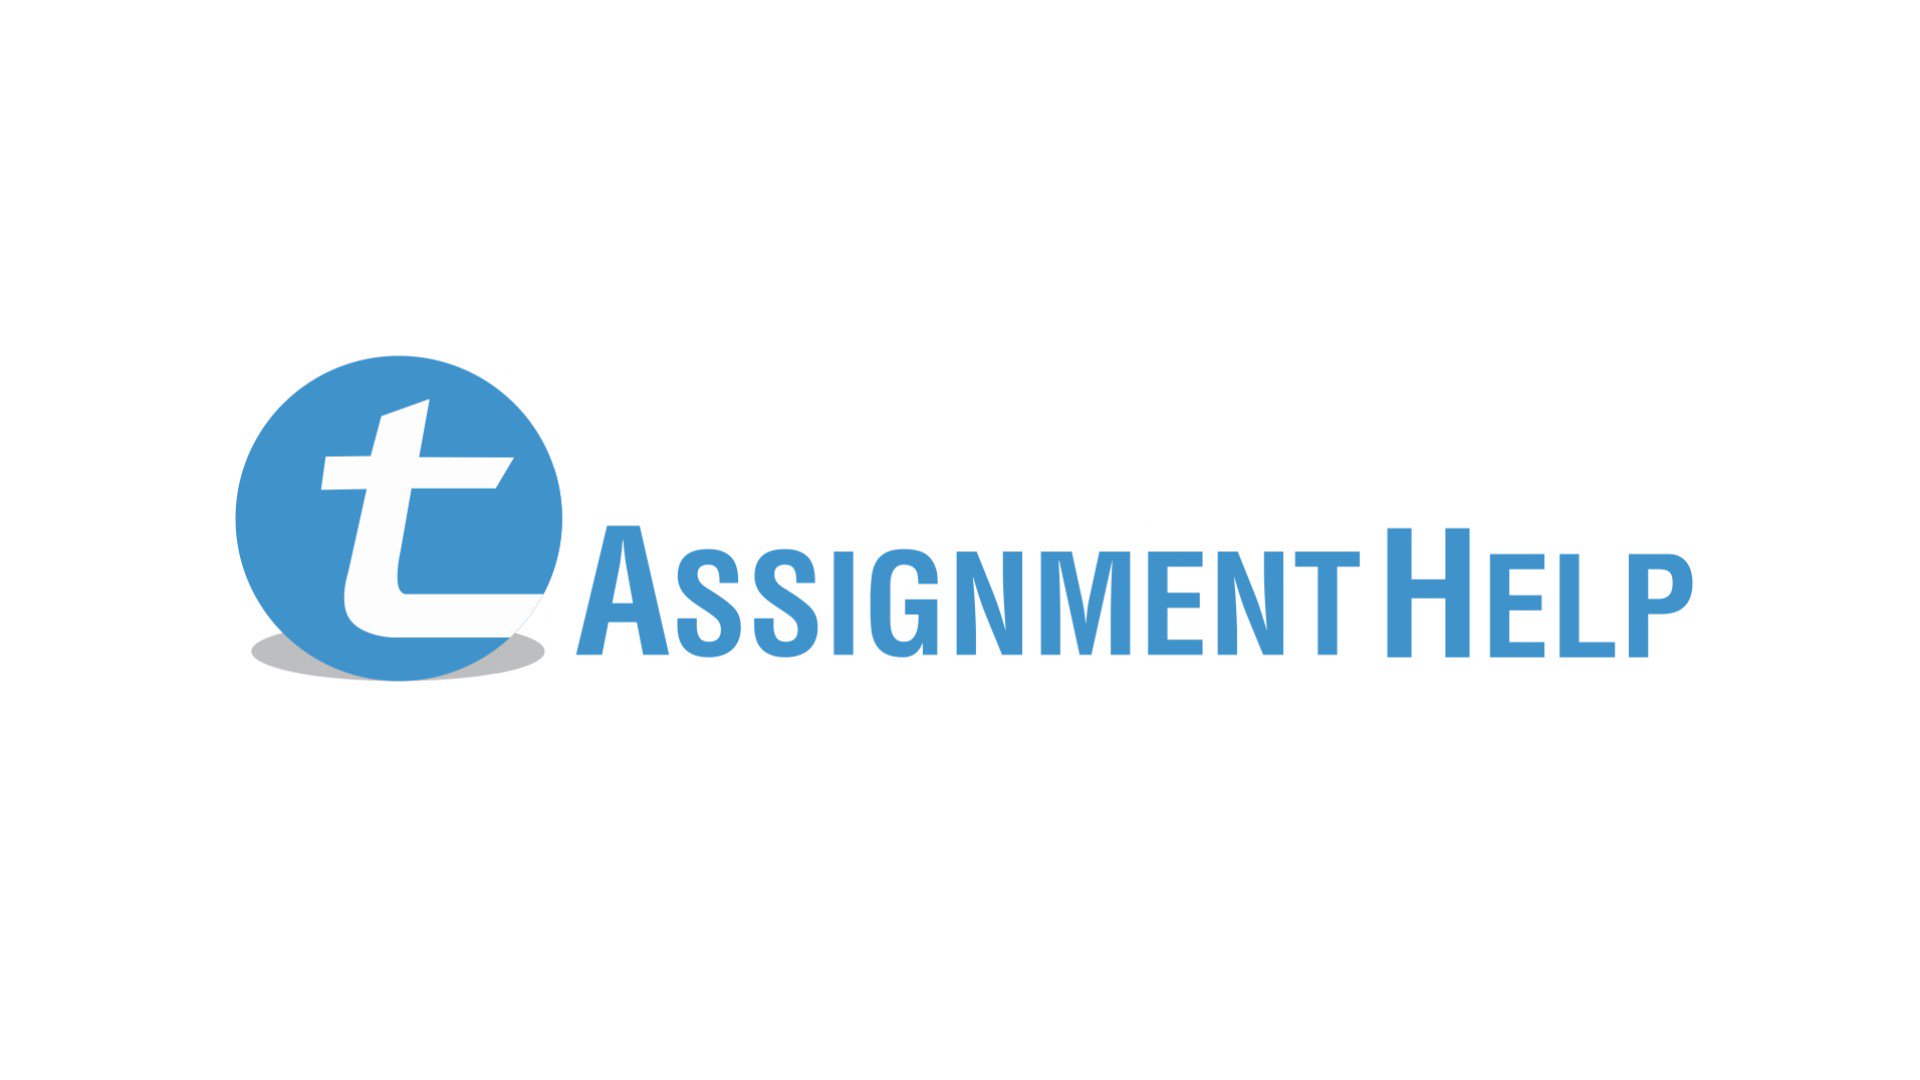 Total Assignment Help reviews